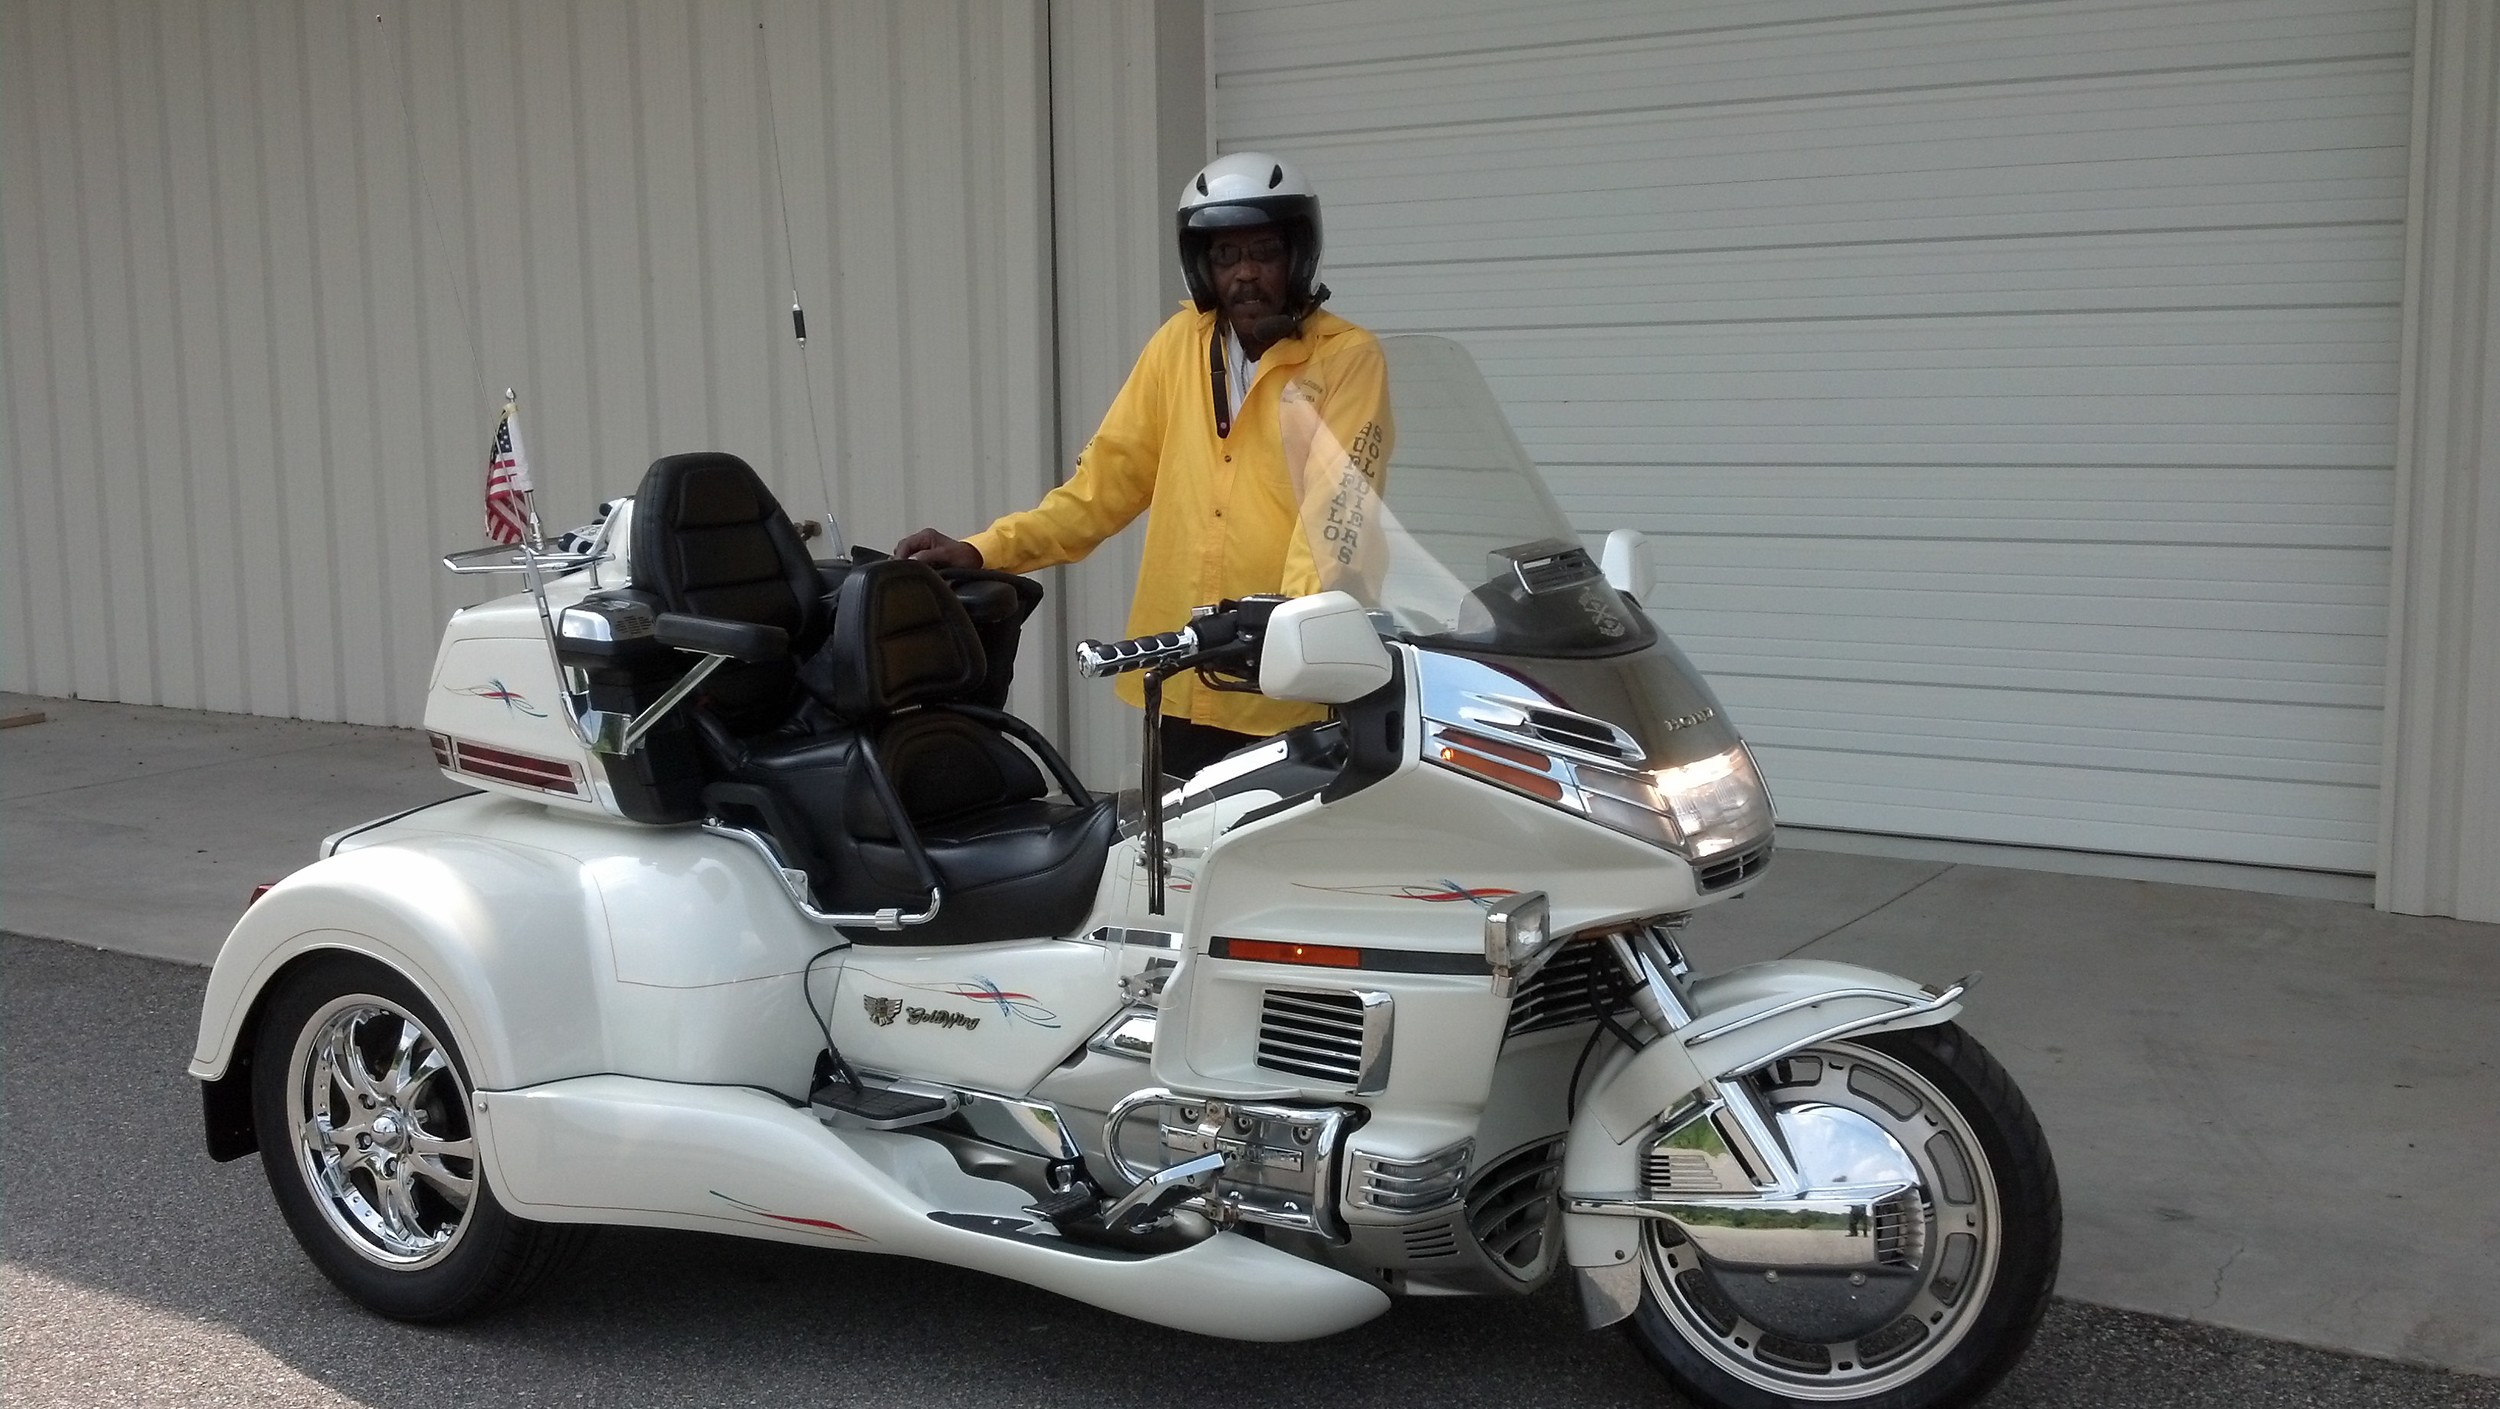 Mike with his goldwing 1500 trike kit conversion